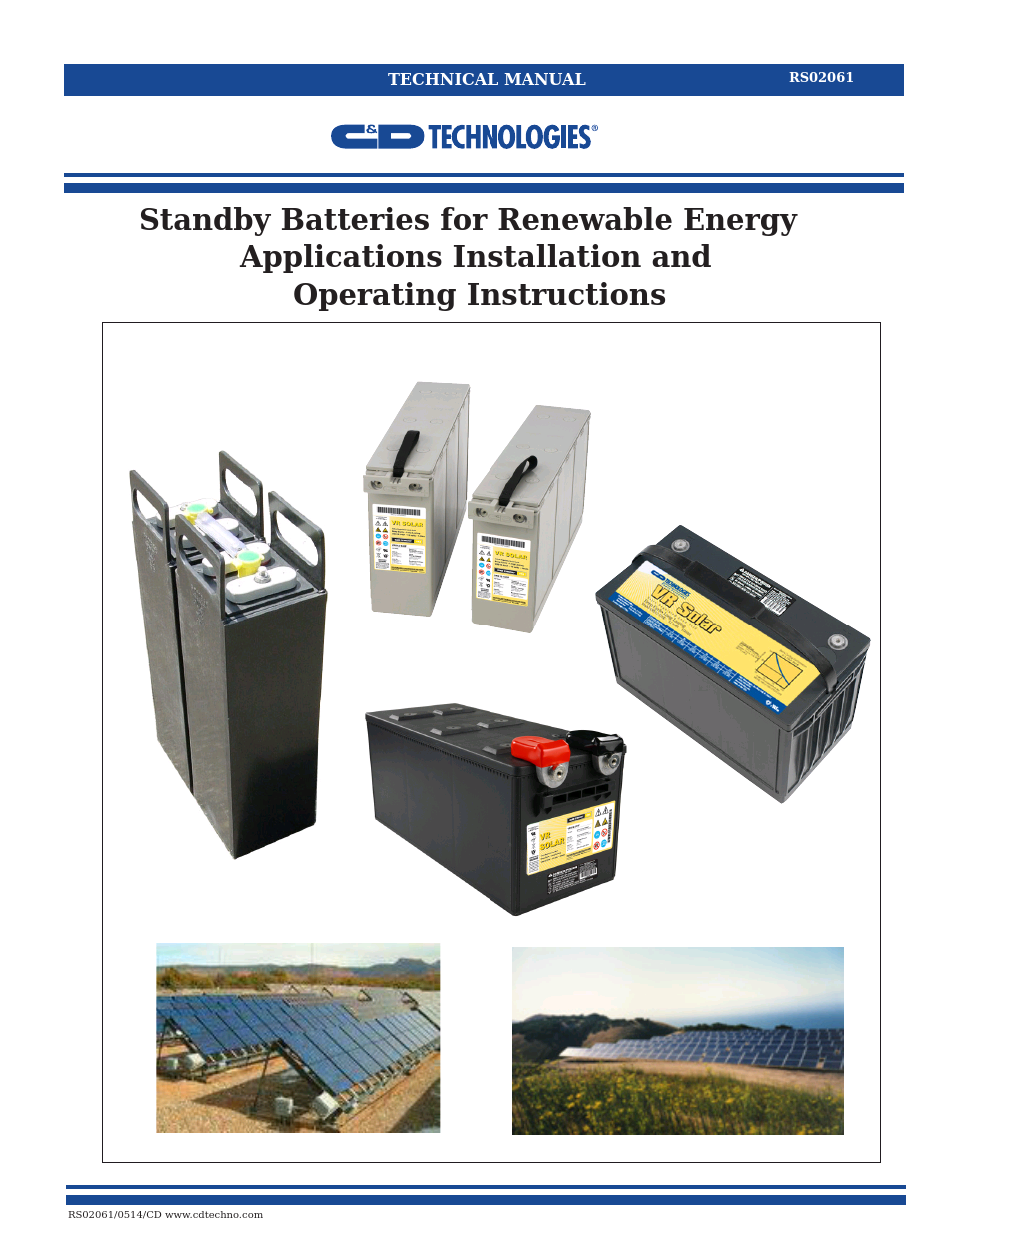 RS-2061 Standby Batteries for Renewable Energy Applications